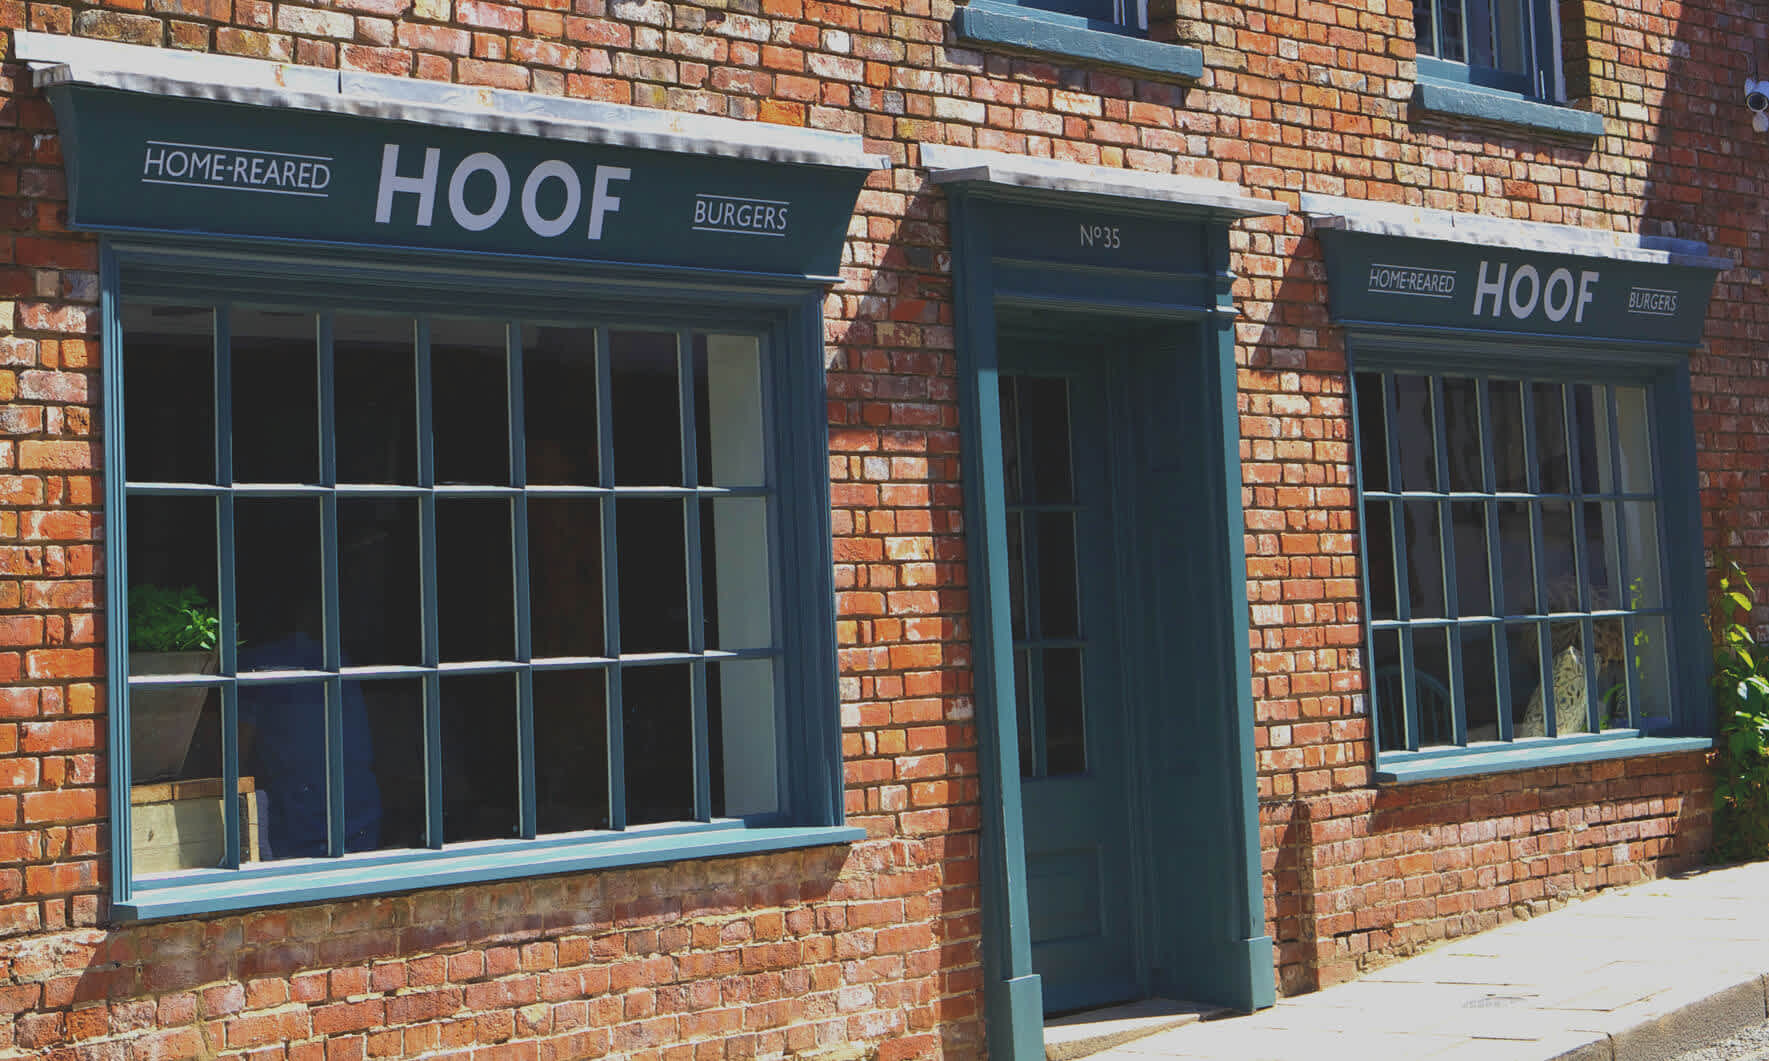 Photograph of the Hoof shopfront in Rye